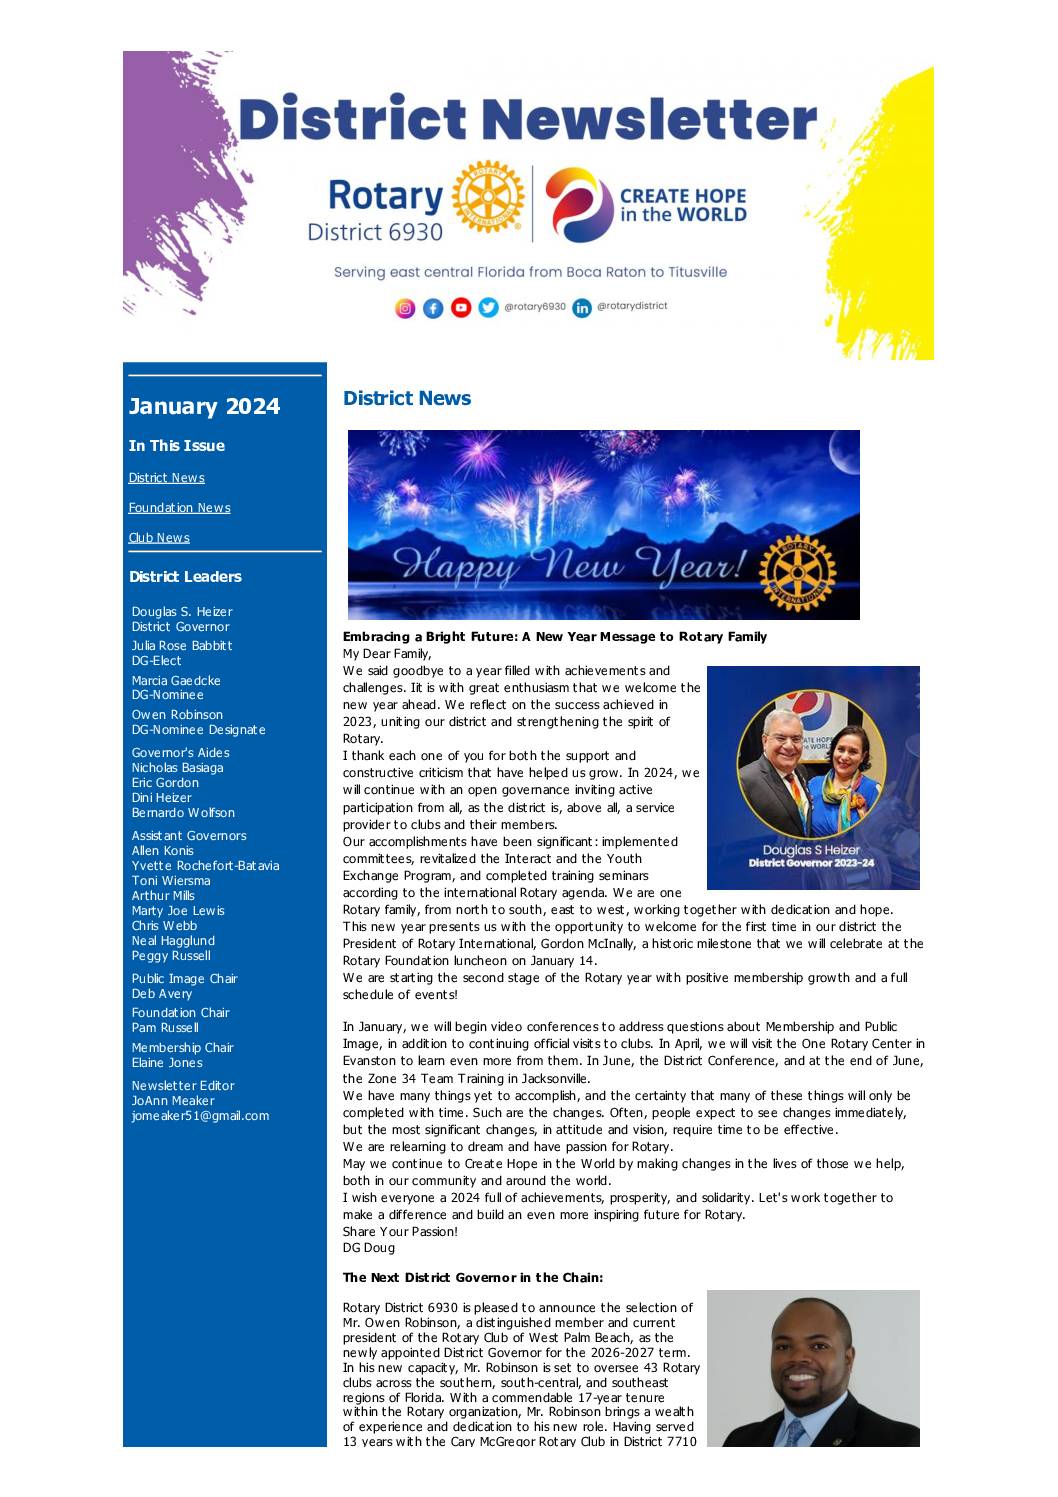 Rotary District 6930 Newsletter January 2024